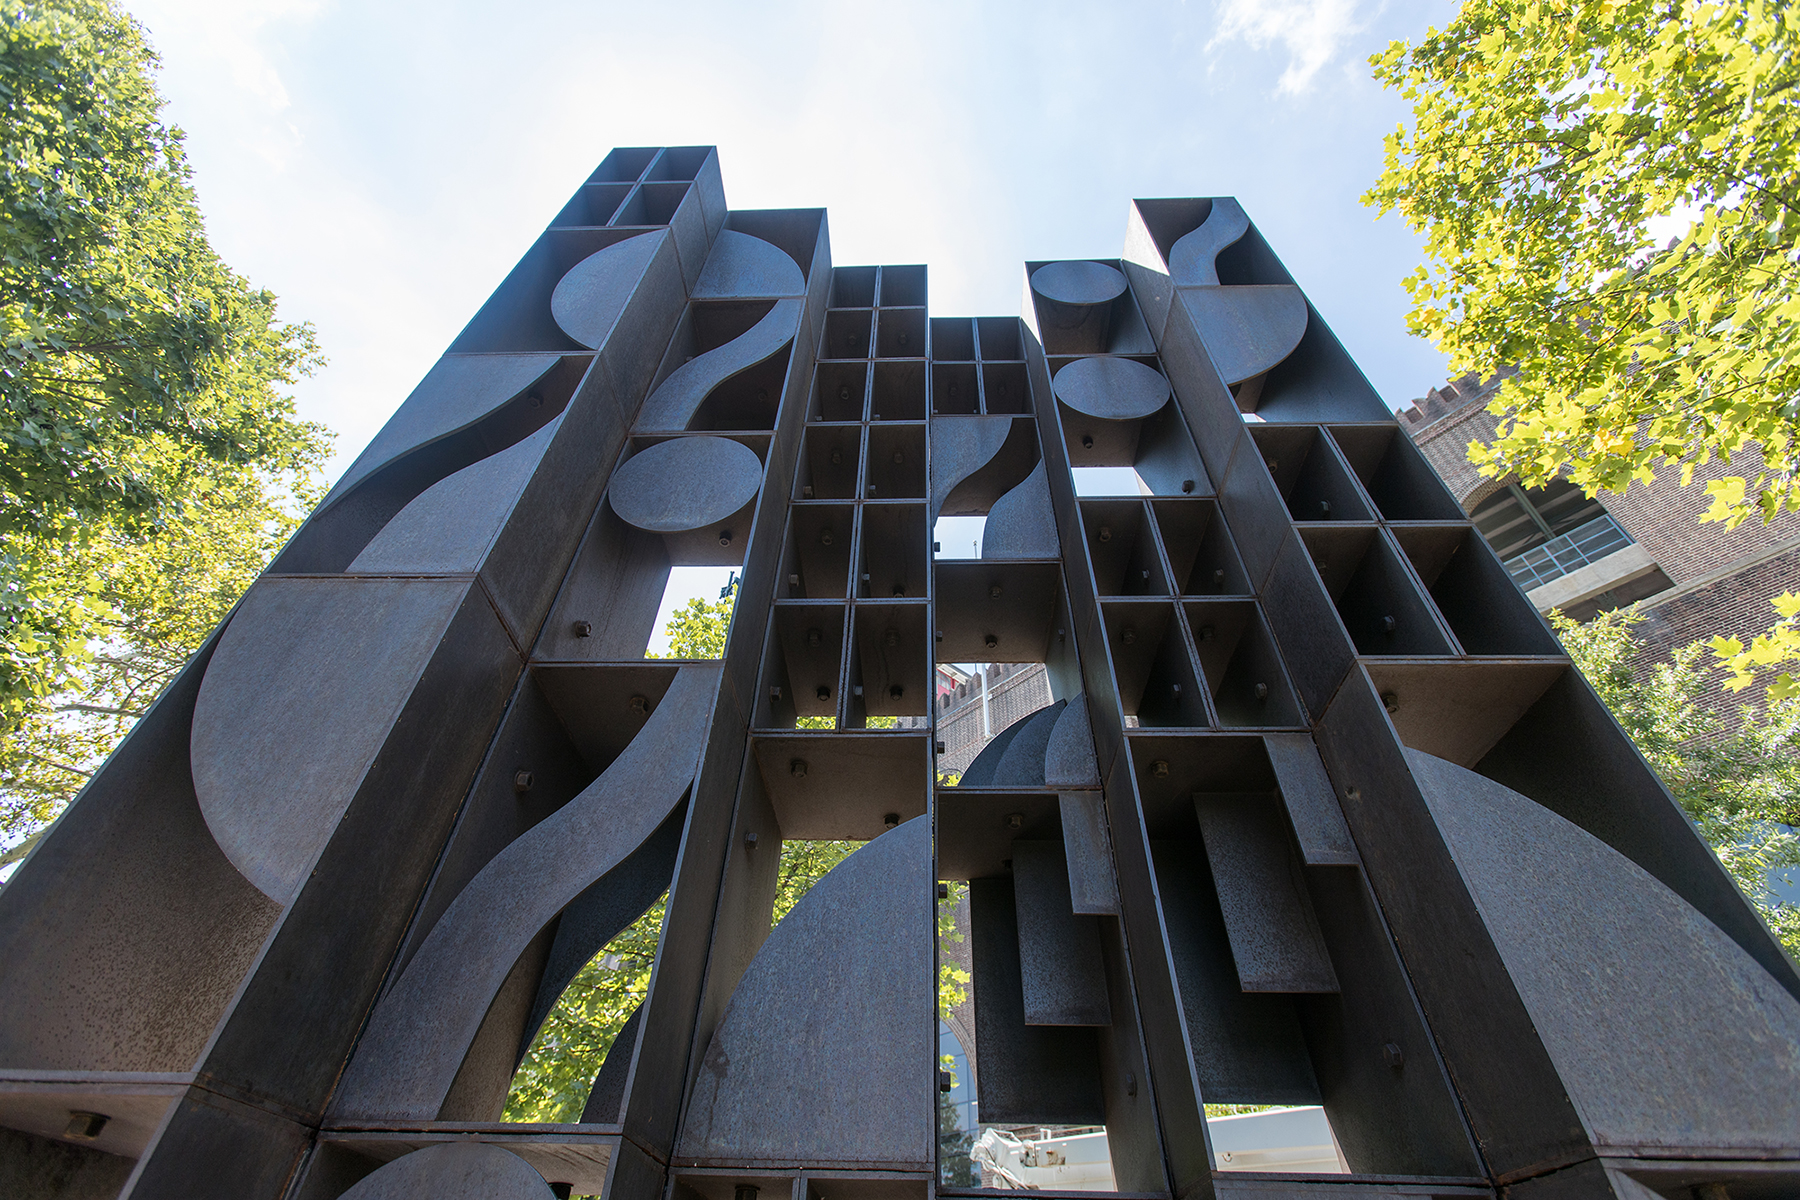 Atmosphere and Environment - bronze geometric Louise Nevelson sculpture with trees around it